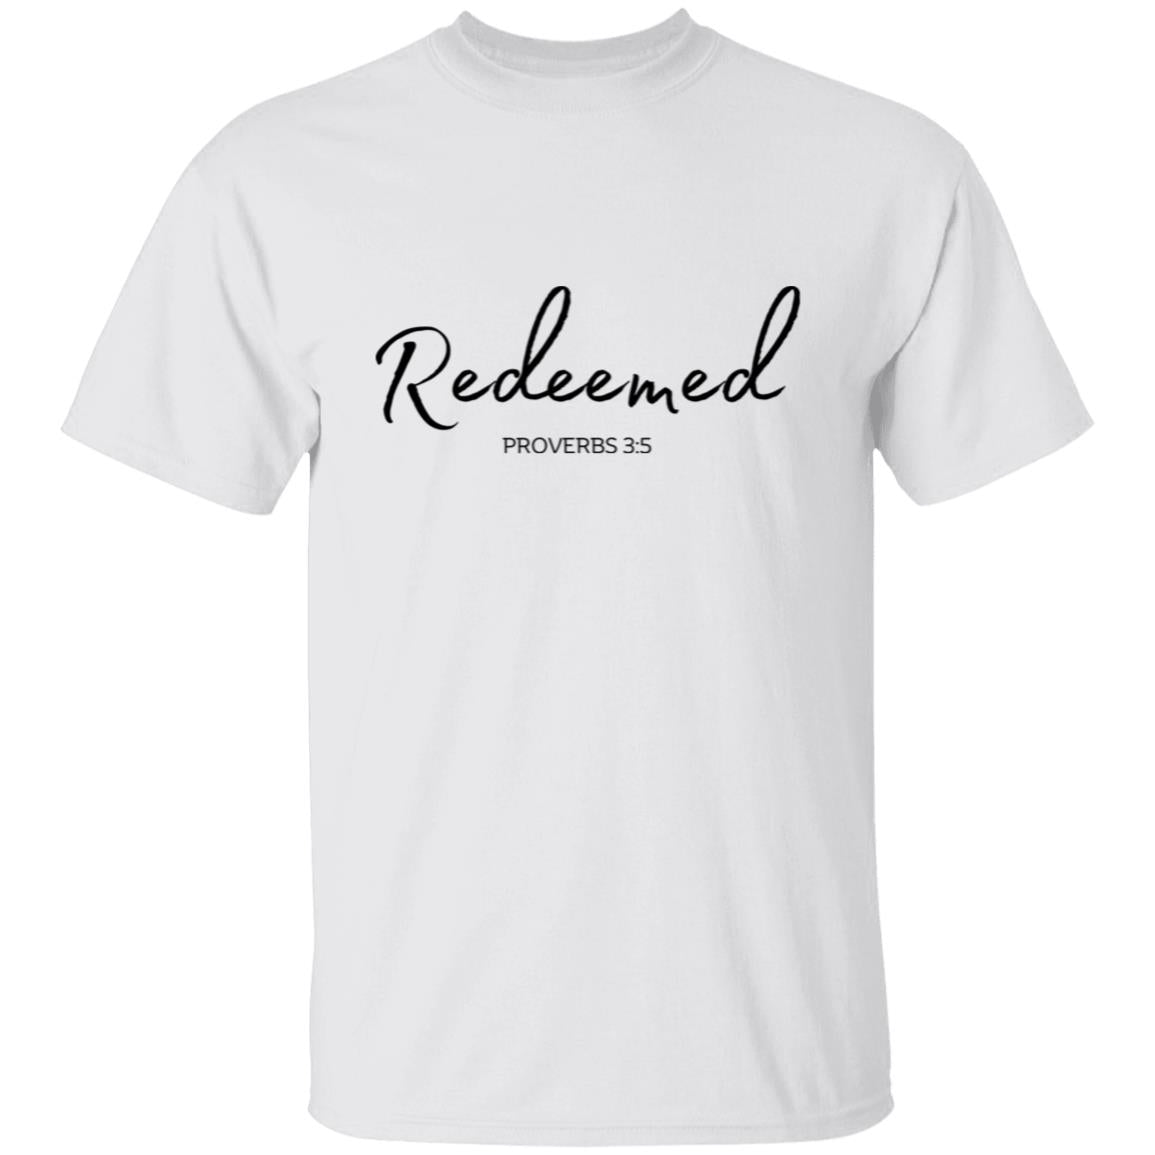 Get trendy with Redeemed (2) Redeemed (Proverbs 3:5) T-Shirt Words of Faith Series (Black Text) - T-Shirts available at Good Gift Company. Grab yours for $21.95 today!